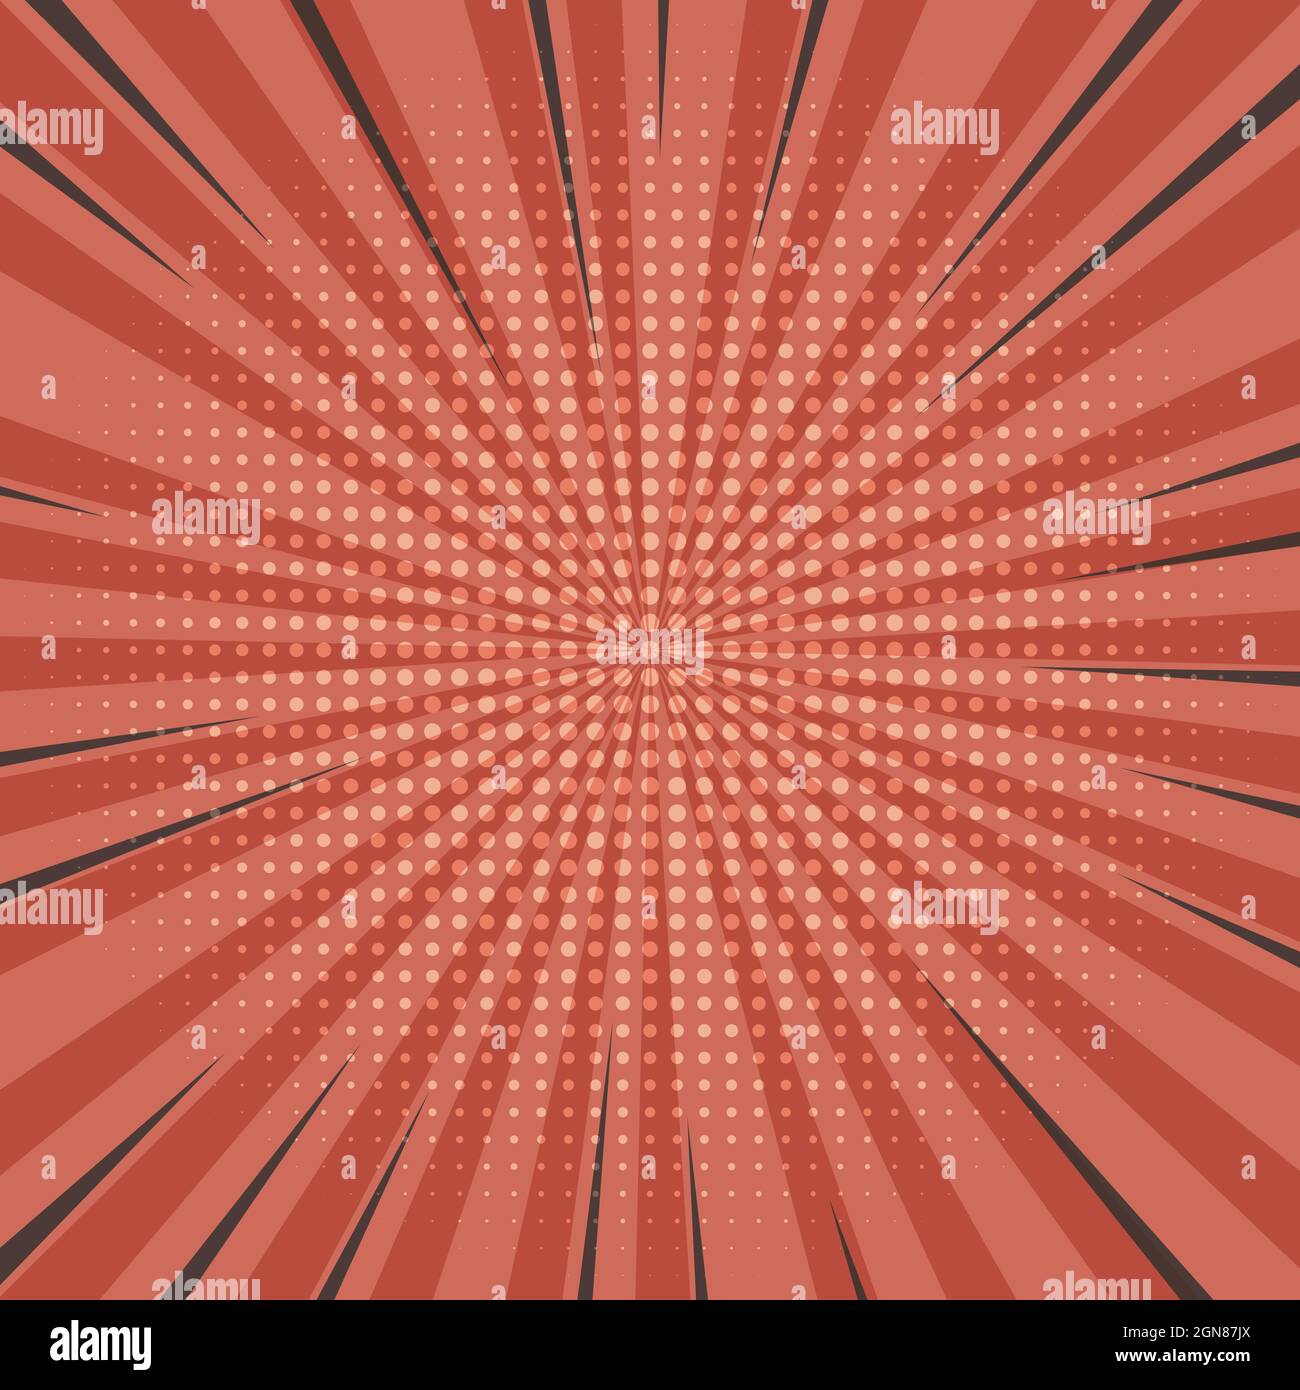 starburst comic background with halftone grid, vector illustration Stock Vector